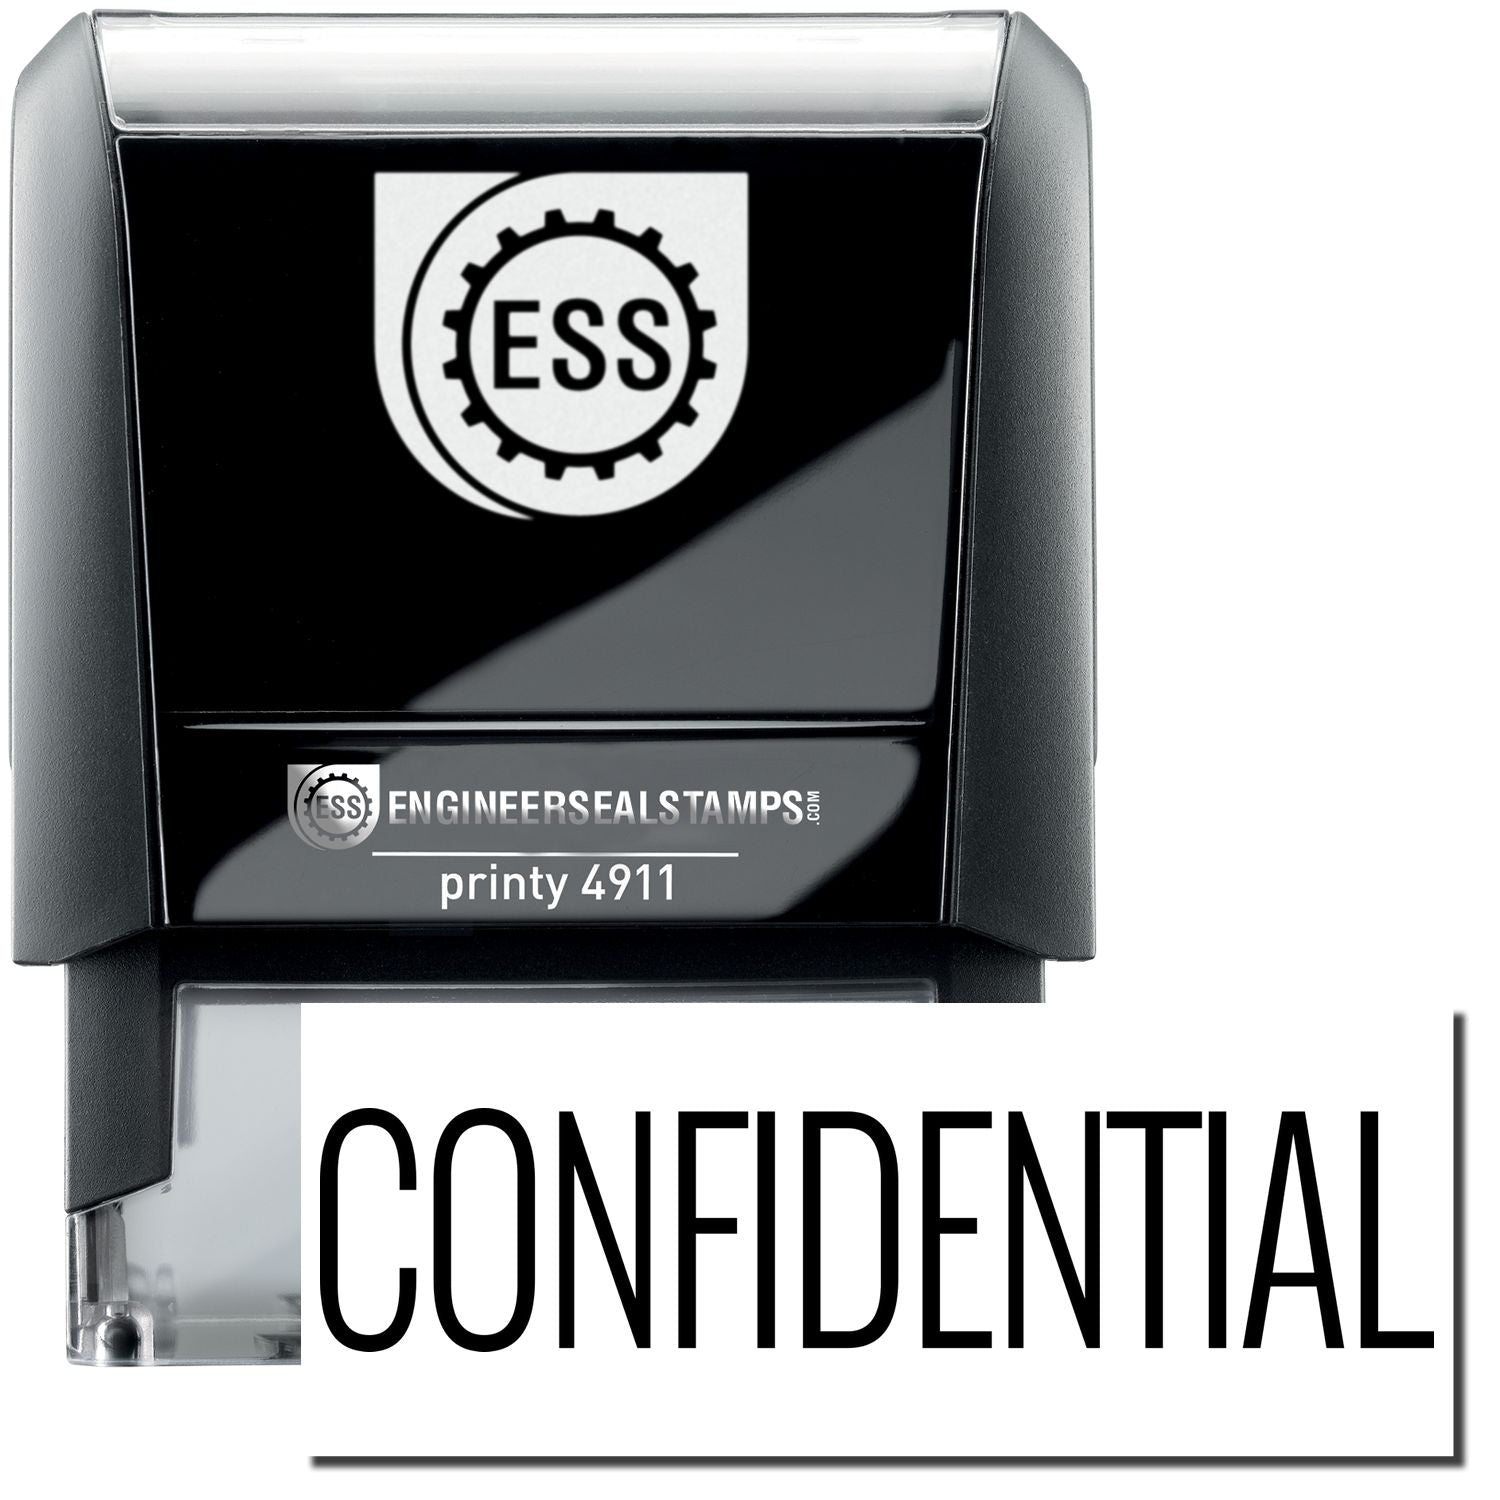 A self-inking stamp with a stamped image showing how the text "CONFIDENTIAL" in a narrow font is displayed after stamping.